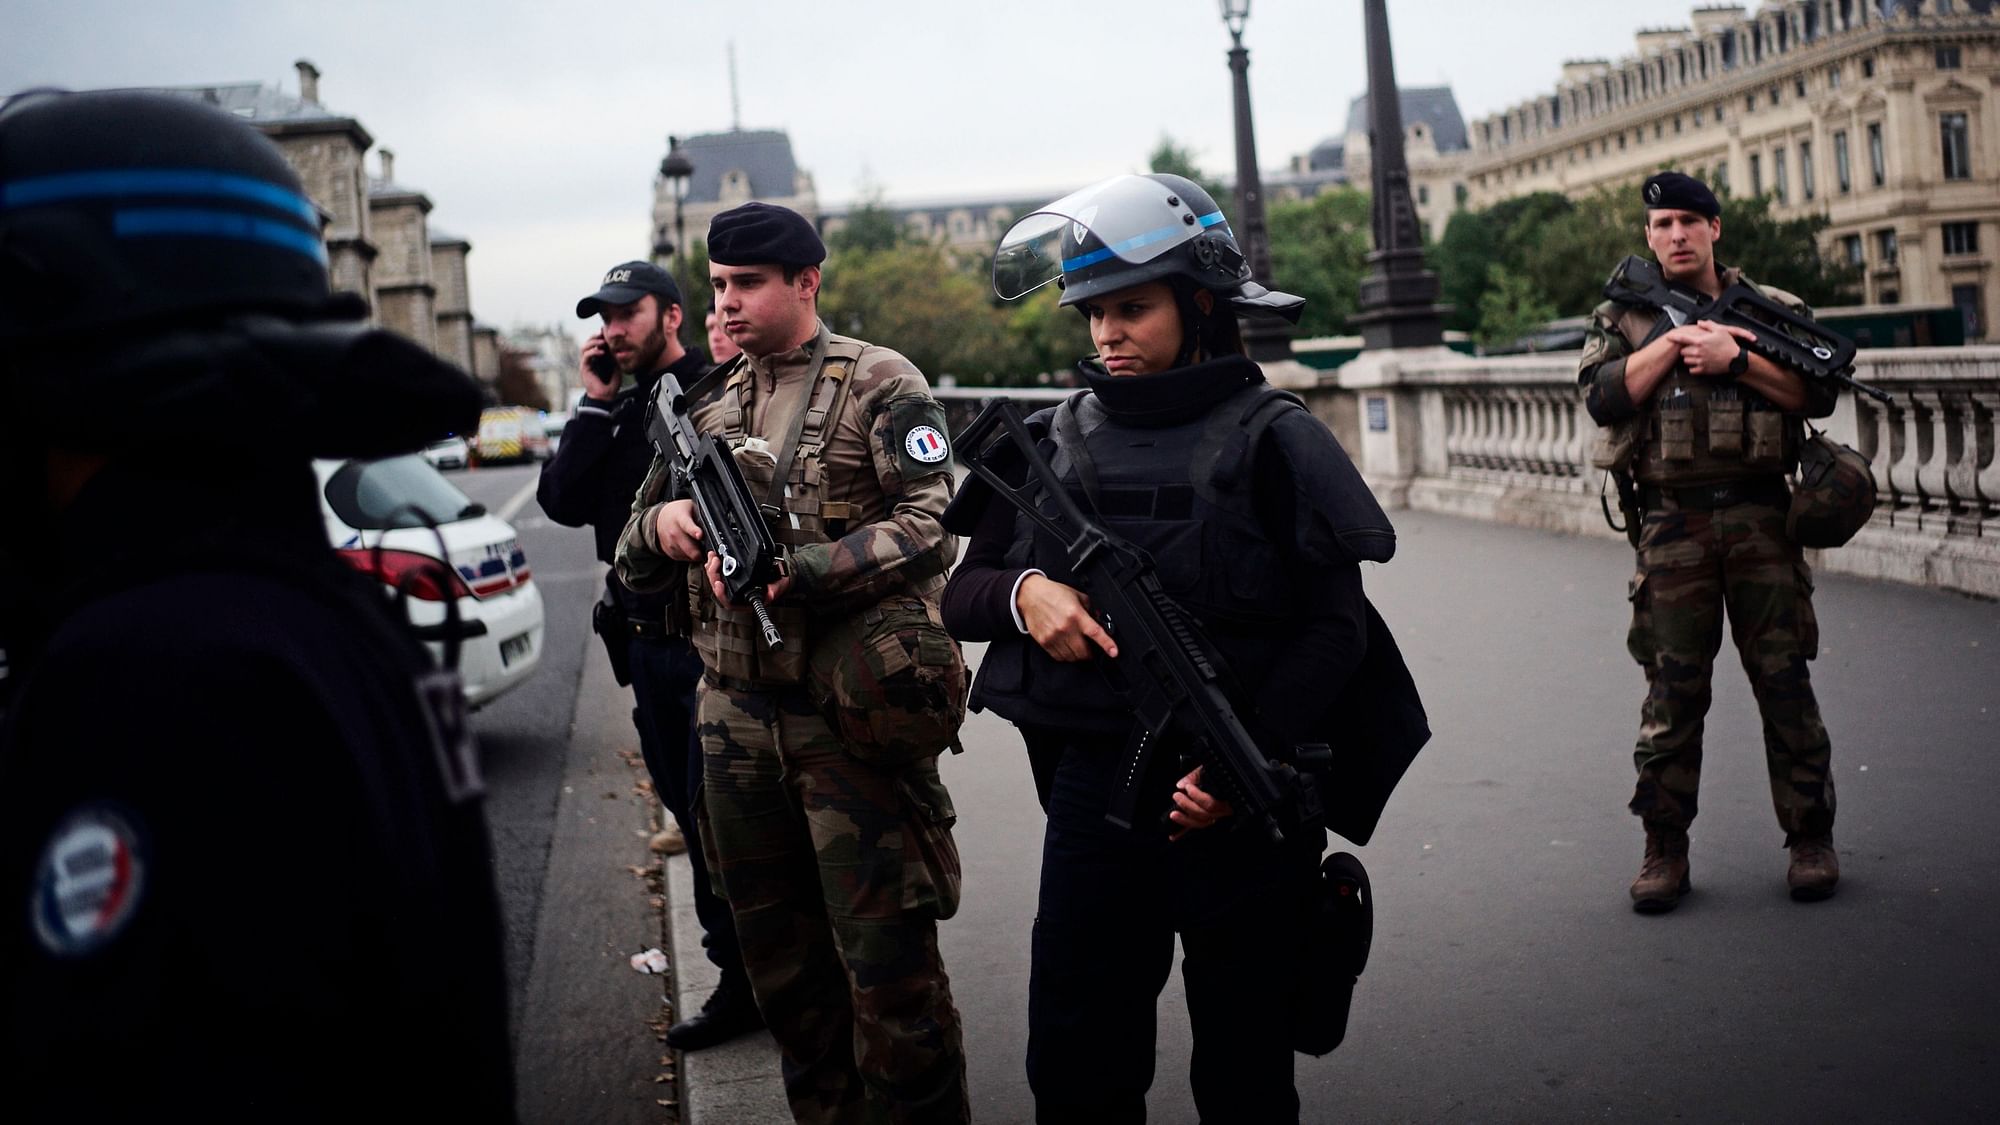 Armed police officers and soldiers patrol after an incident at the police headquarters in Paris.